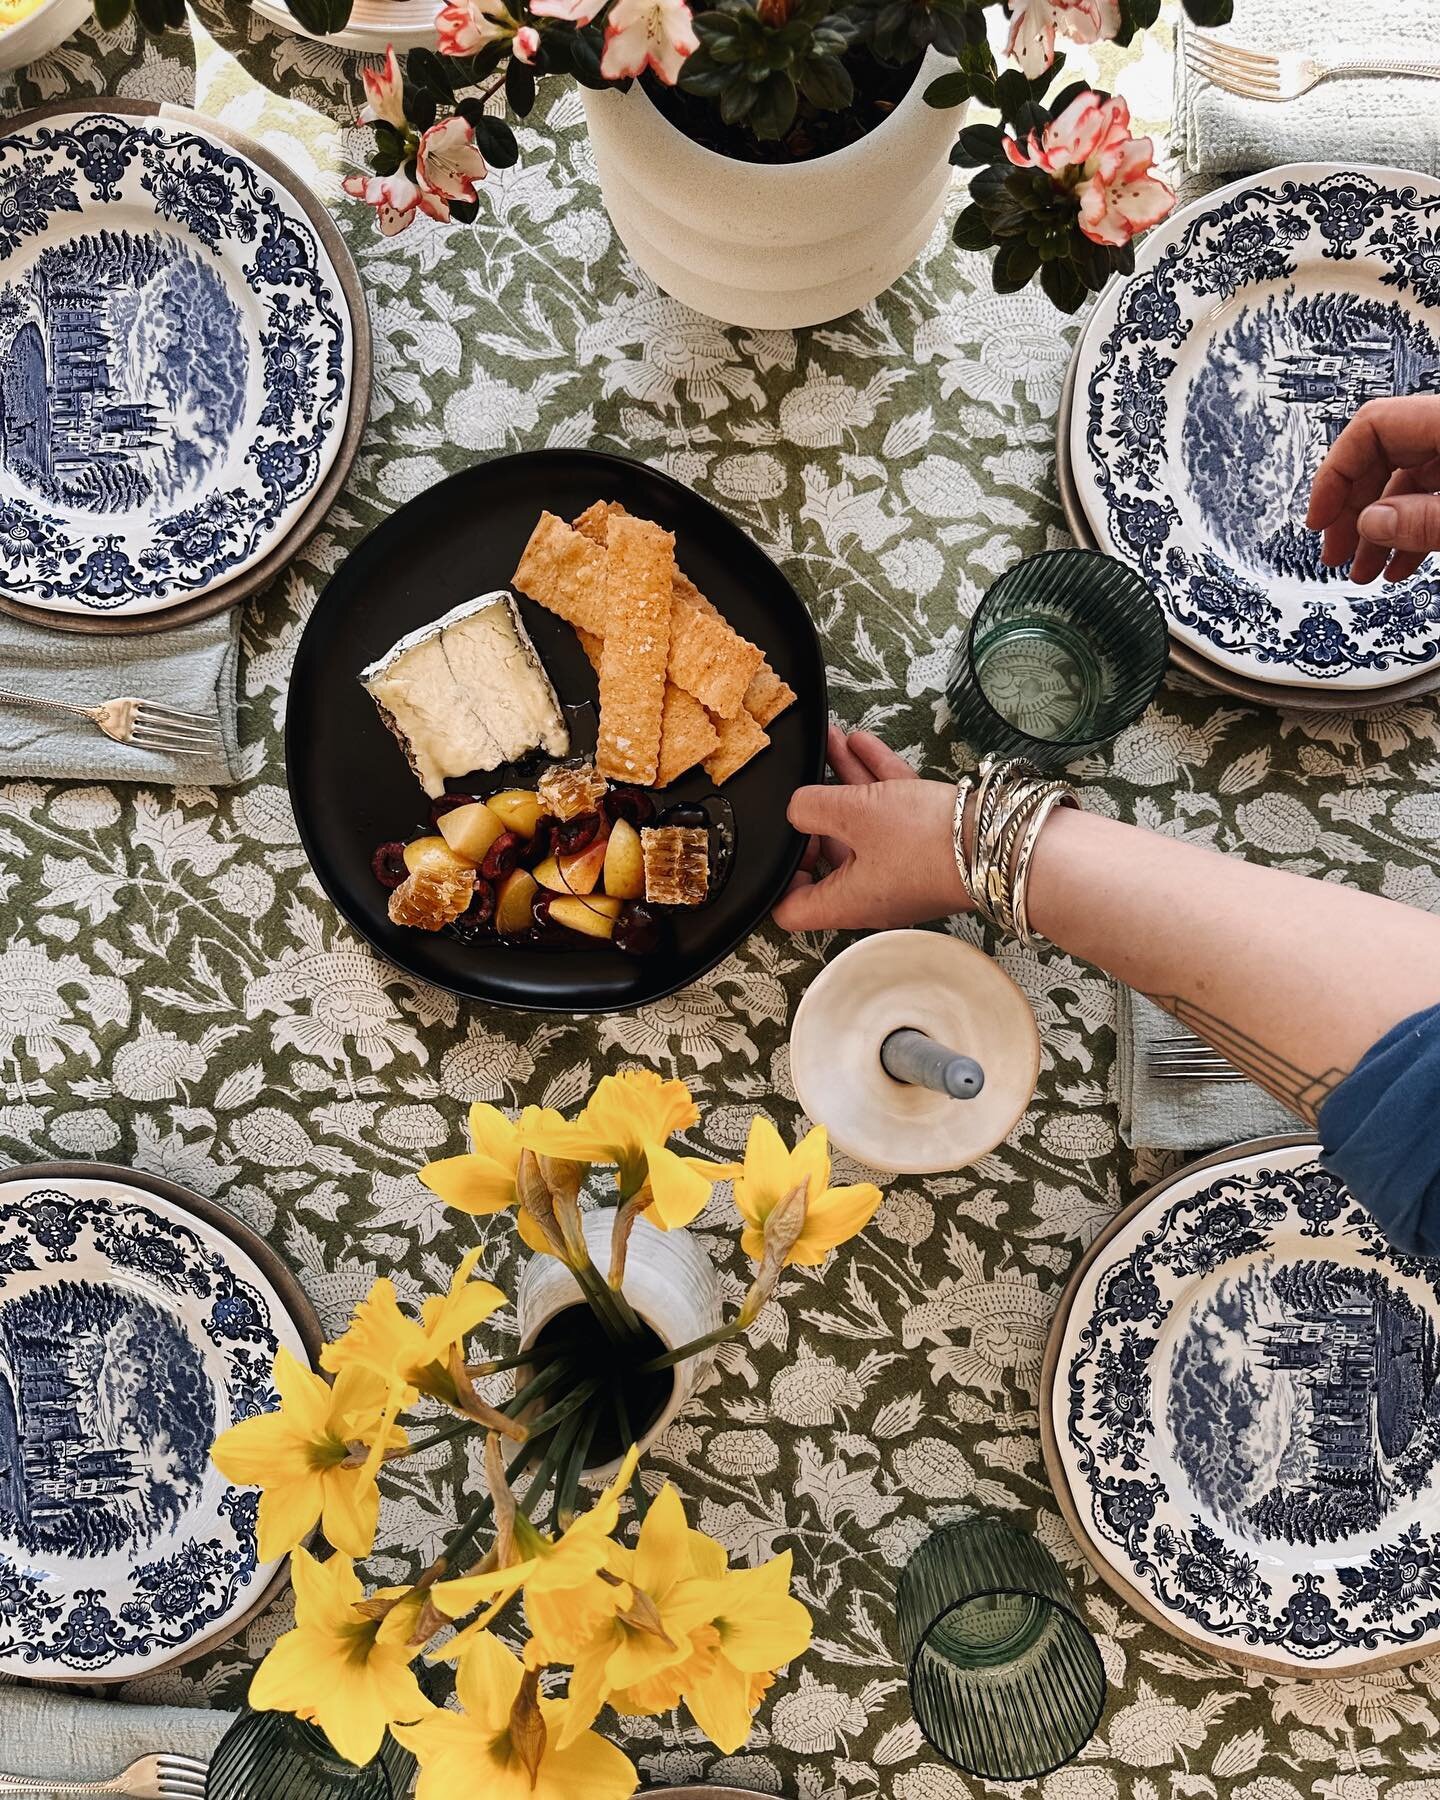 The daffodils are blooming and that means Spring is right around the corner! We can&rsquo;t wait to debut next season&rsquo;s menu for you. Our team has been crafting and testing new dishes for in-home and corporate culinary experiences. Have a reaso